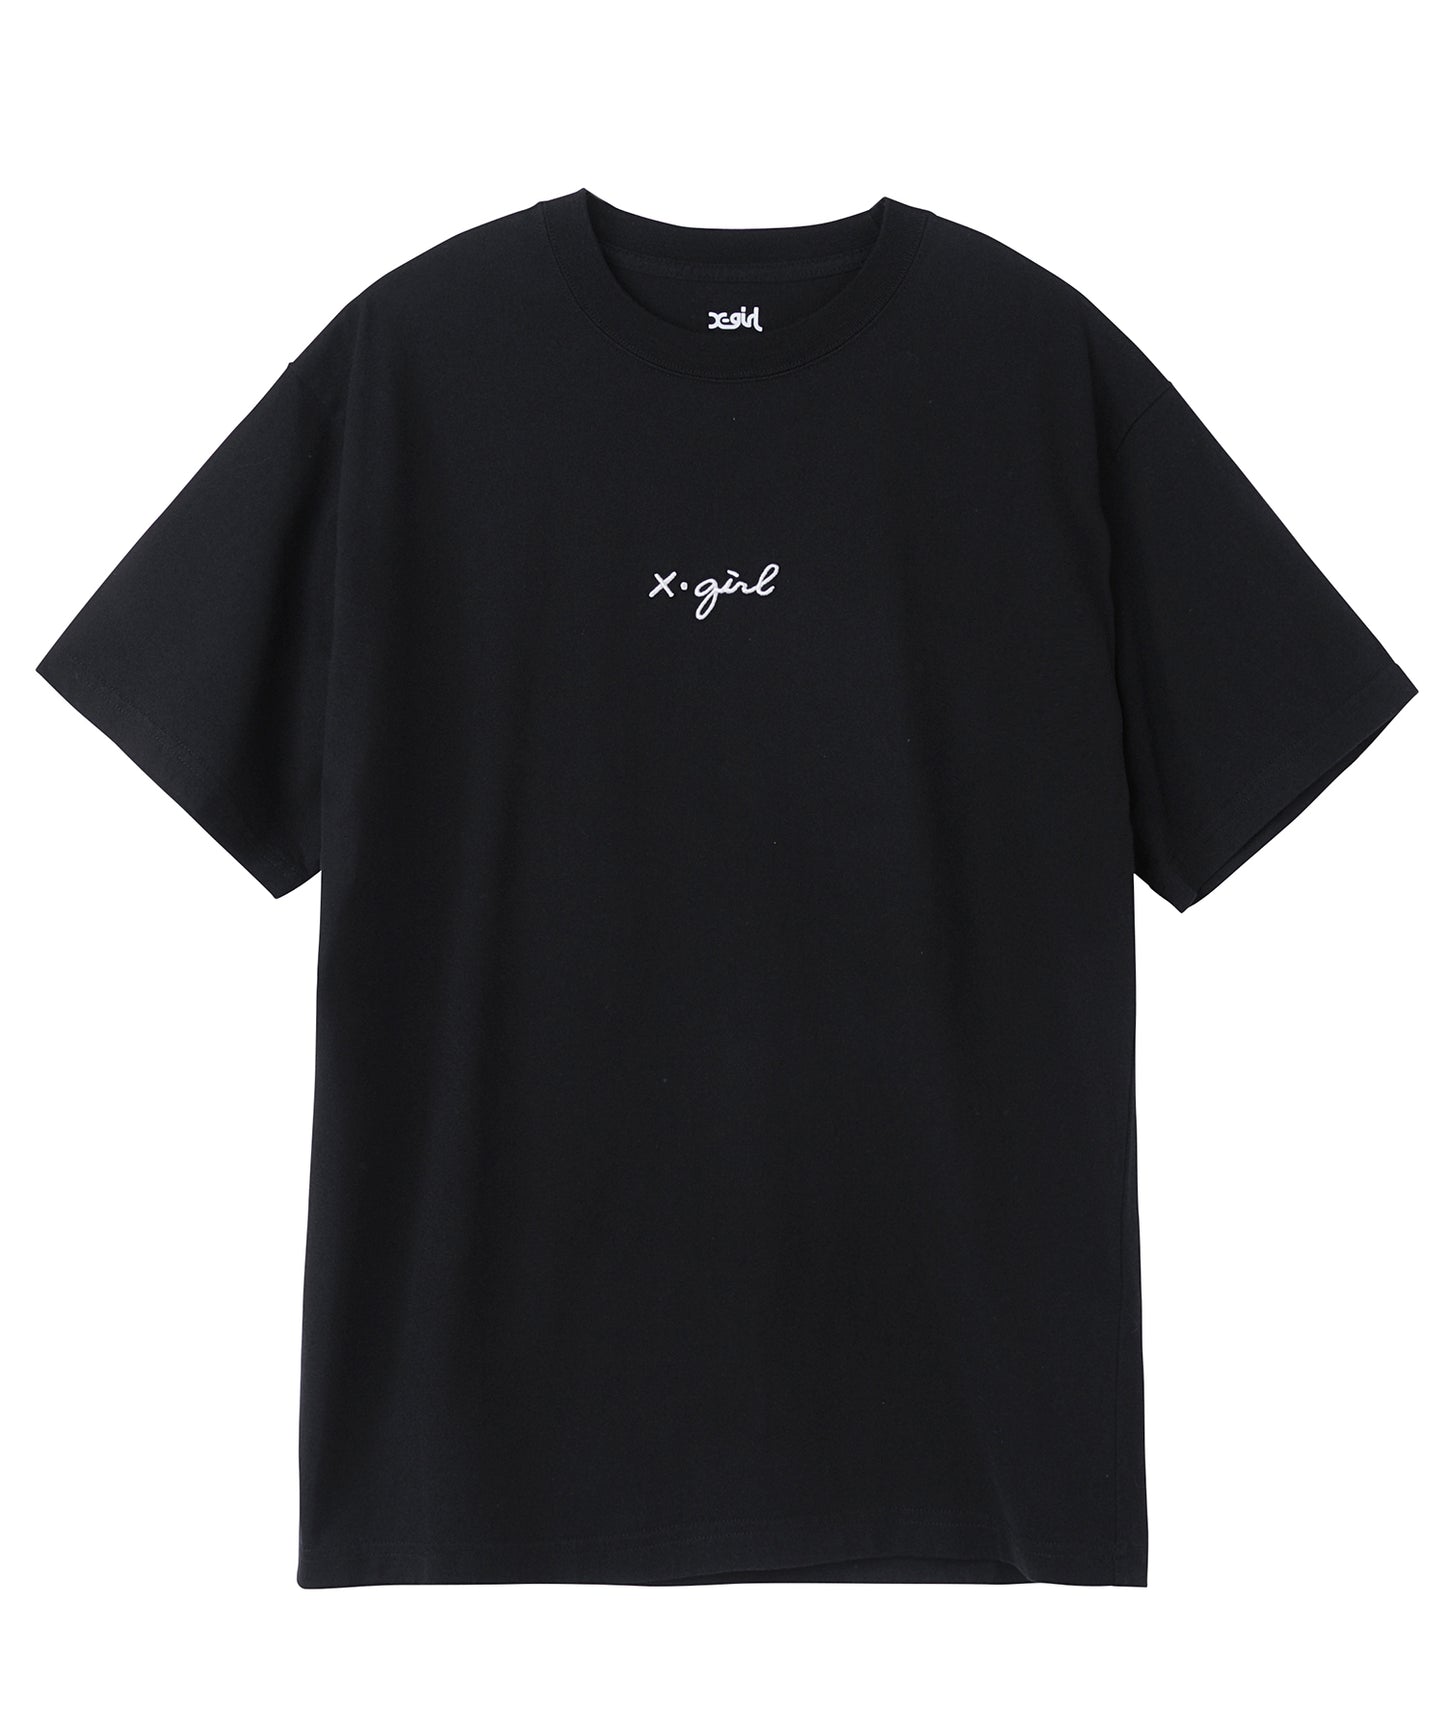 EMBROIDERED CURSIVE LOGO S/S TEE